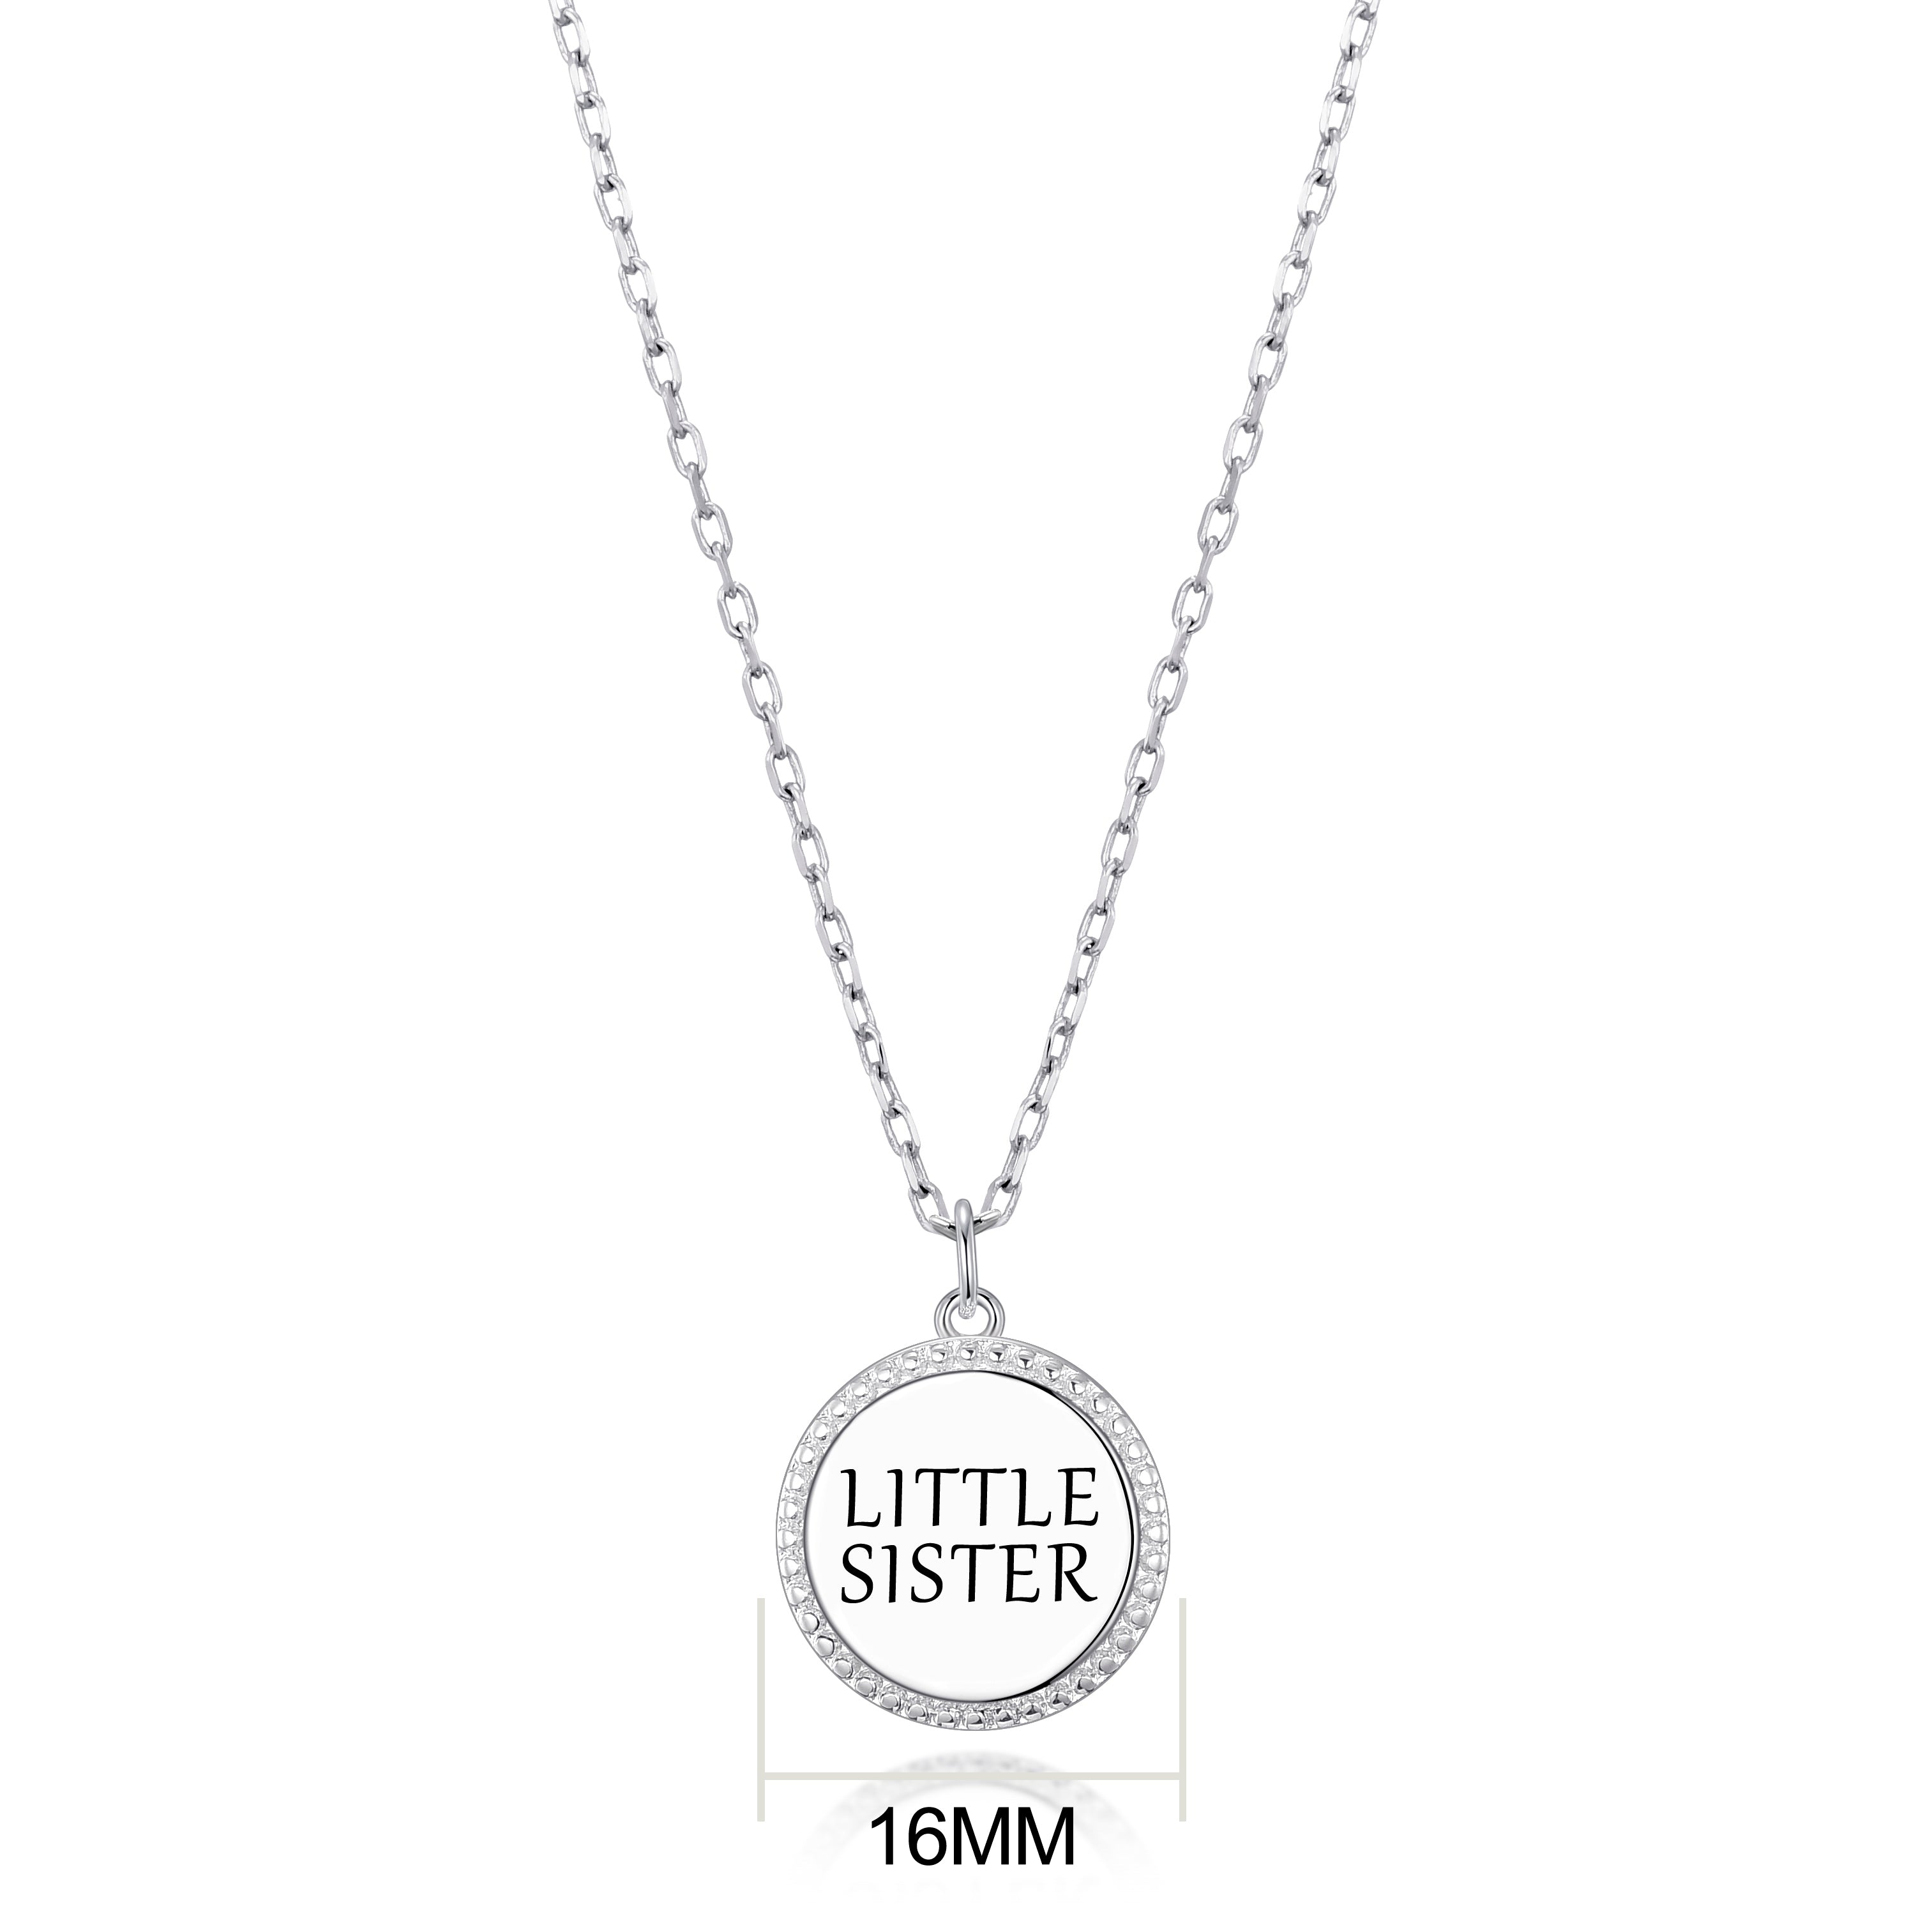 Silver Plated Filigree Disc Little Sister Necklace